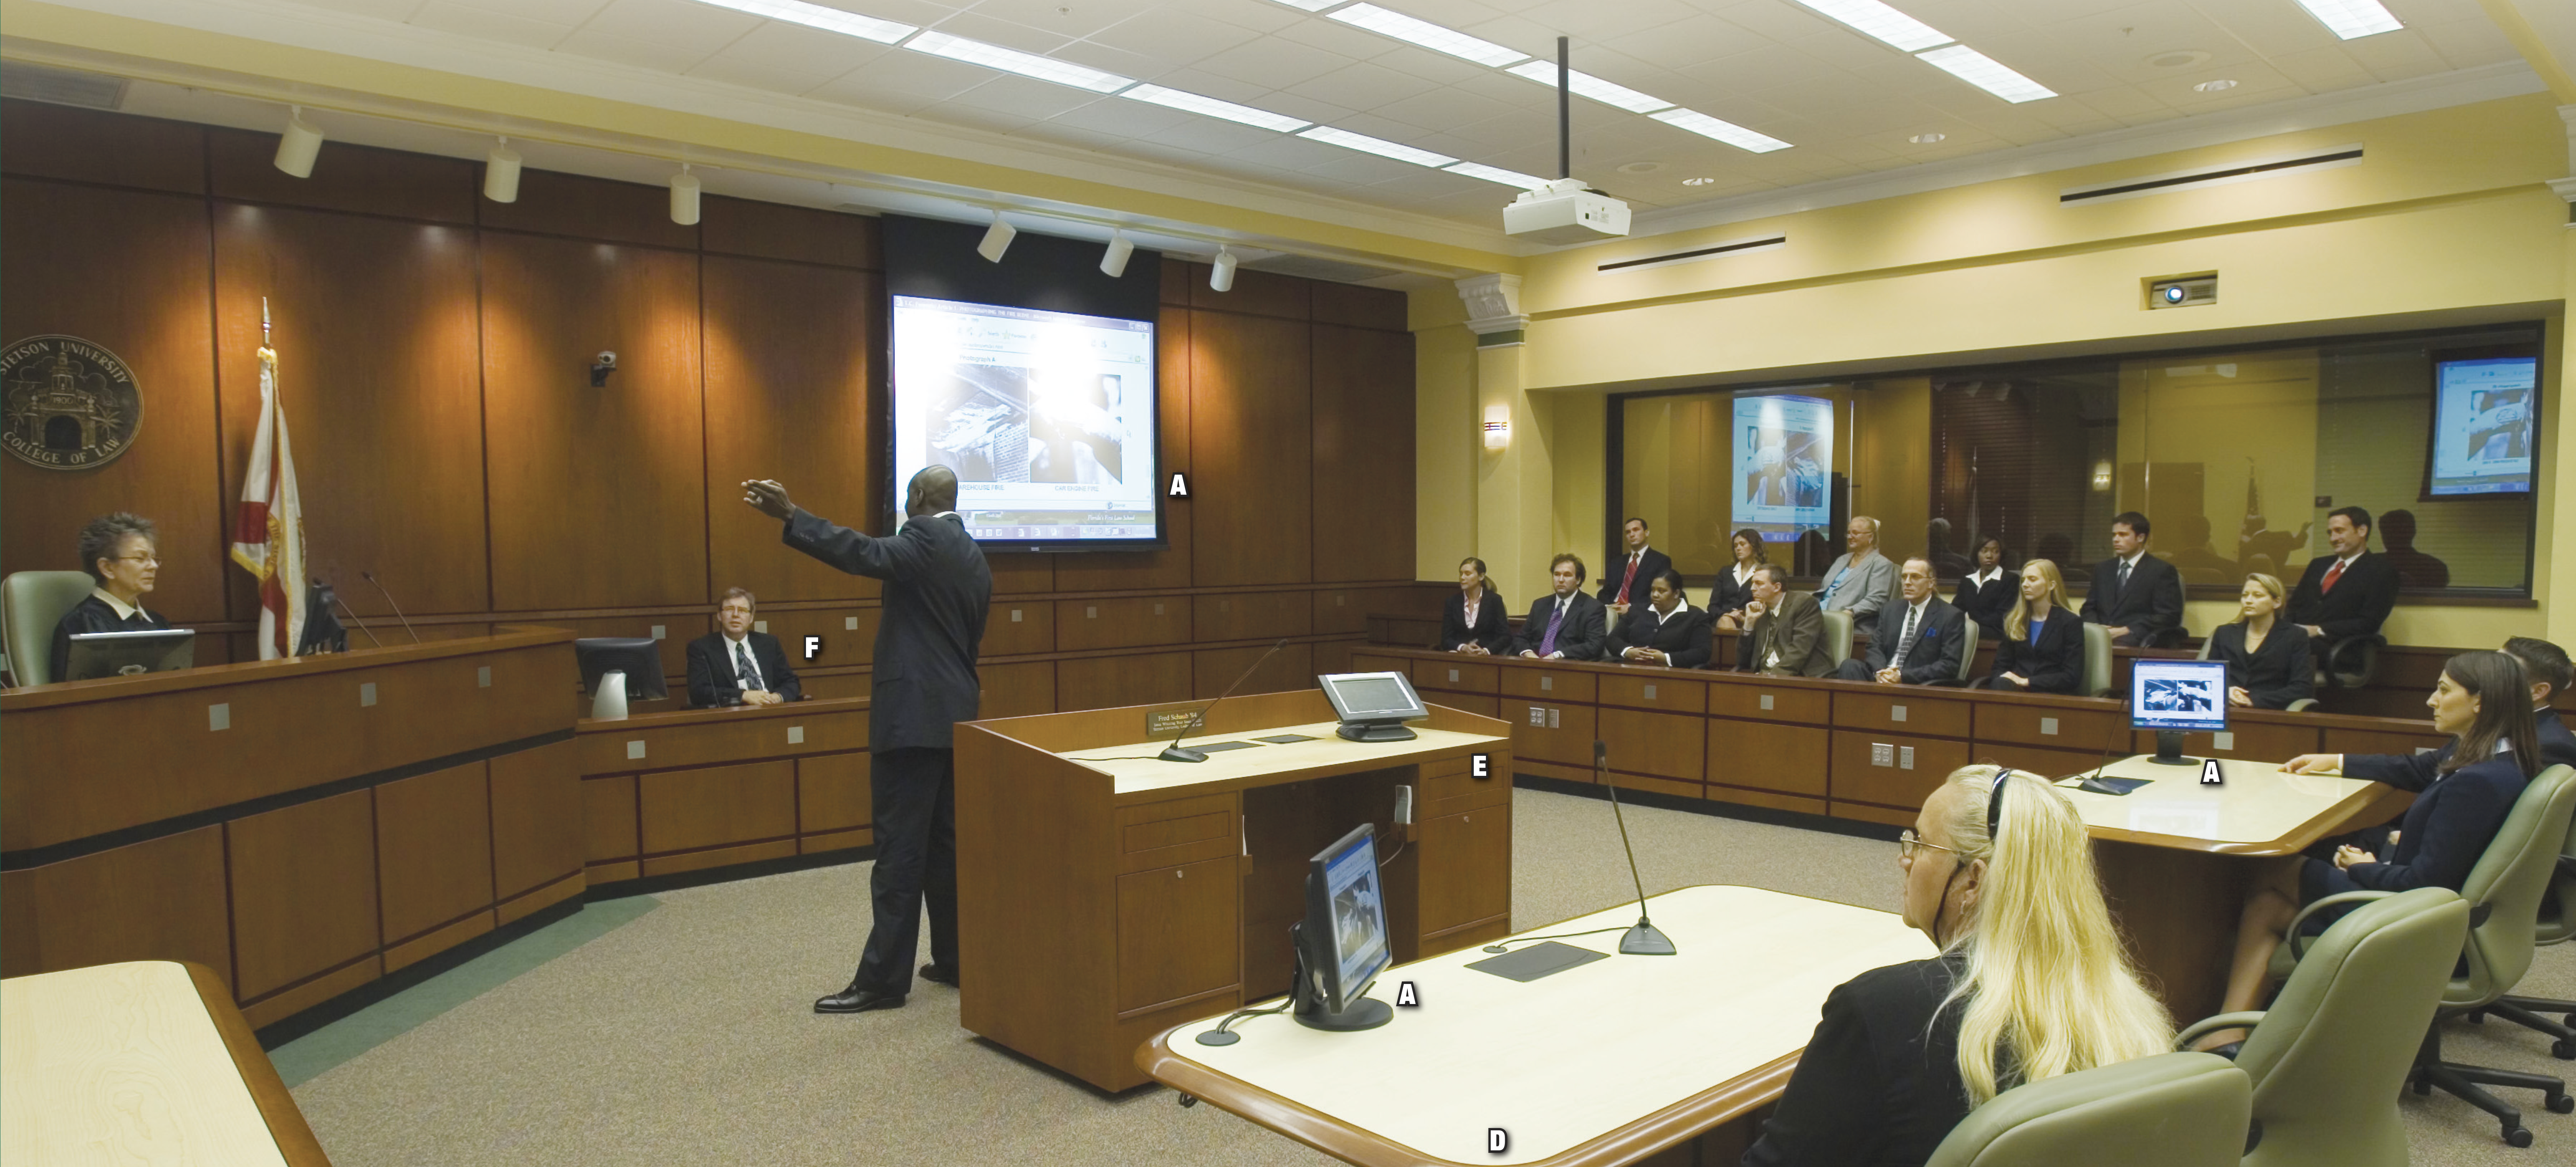 Photo showing the William R. Eleazer Courtroom marking key, improved features